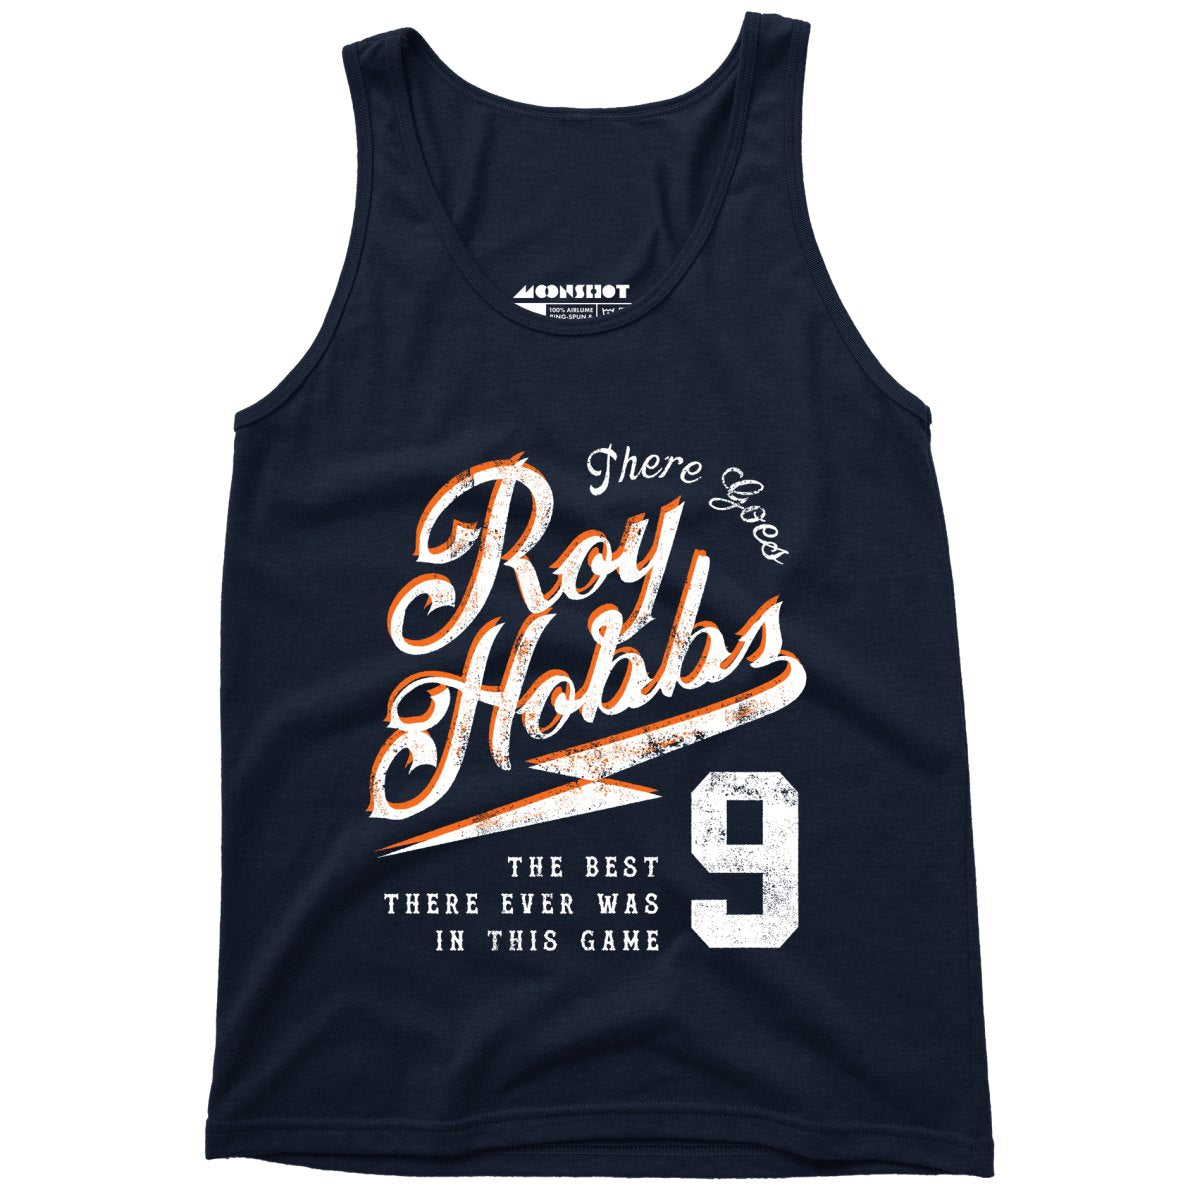 There Goes Roy Hobbs - Unisex Tank Top